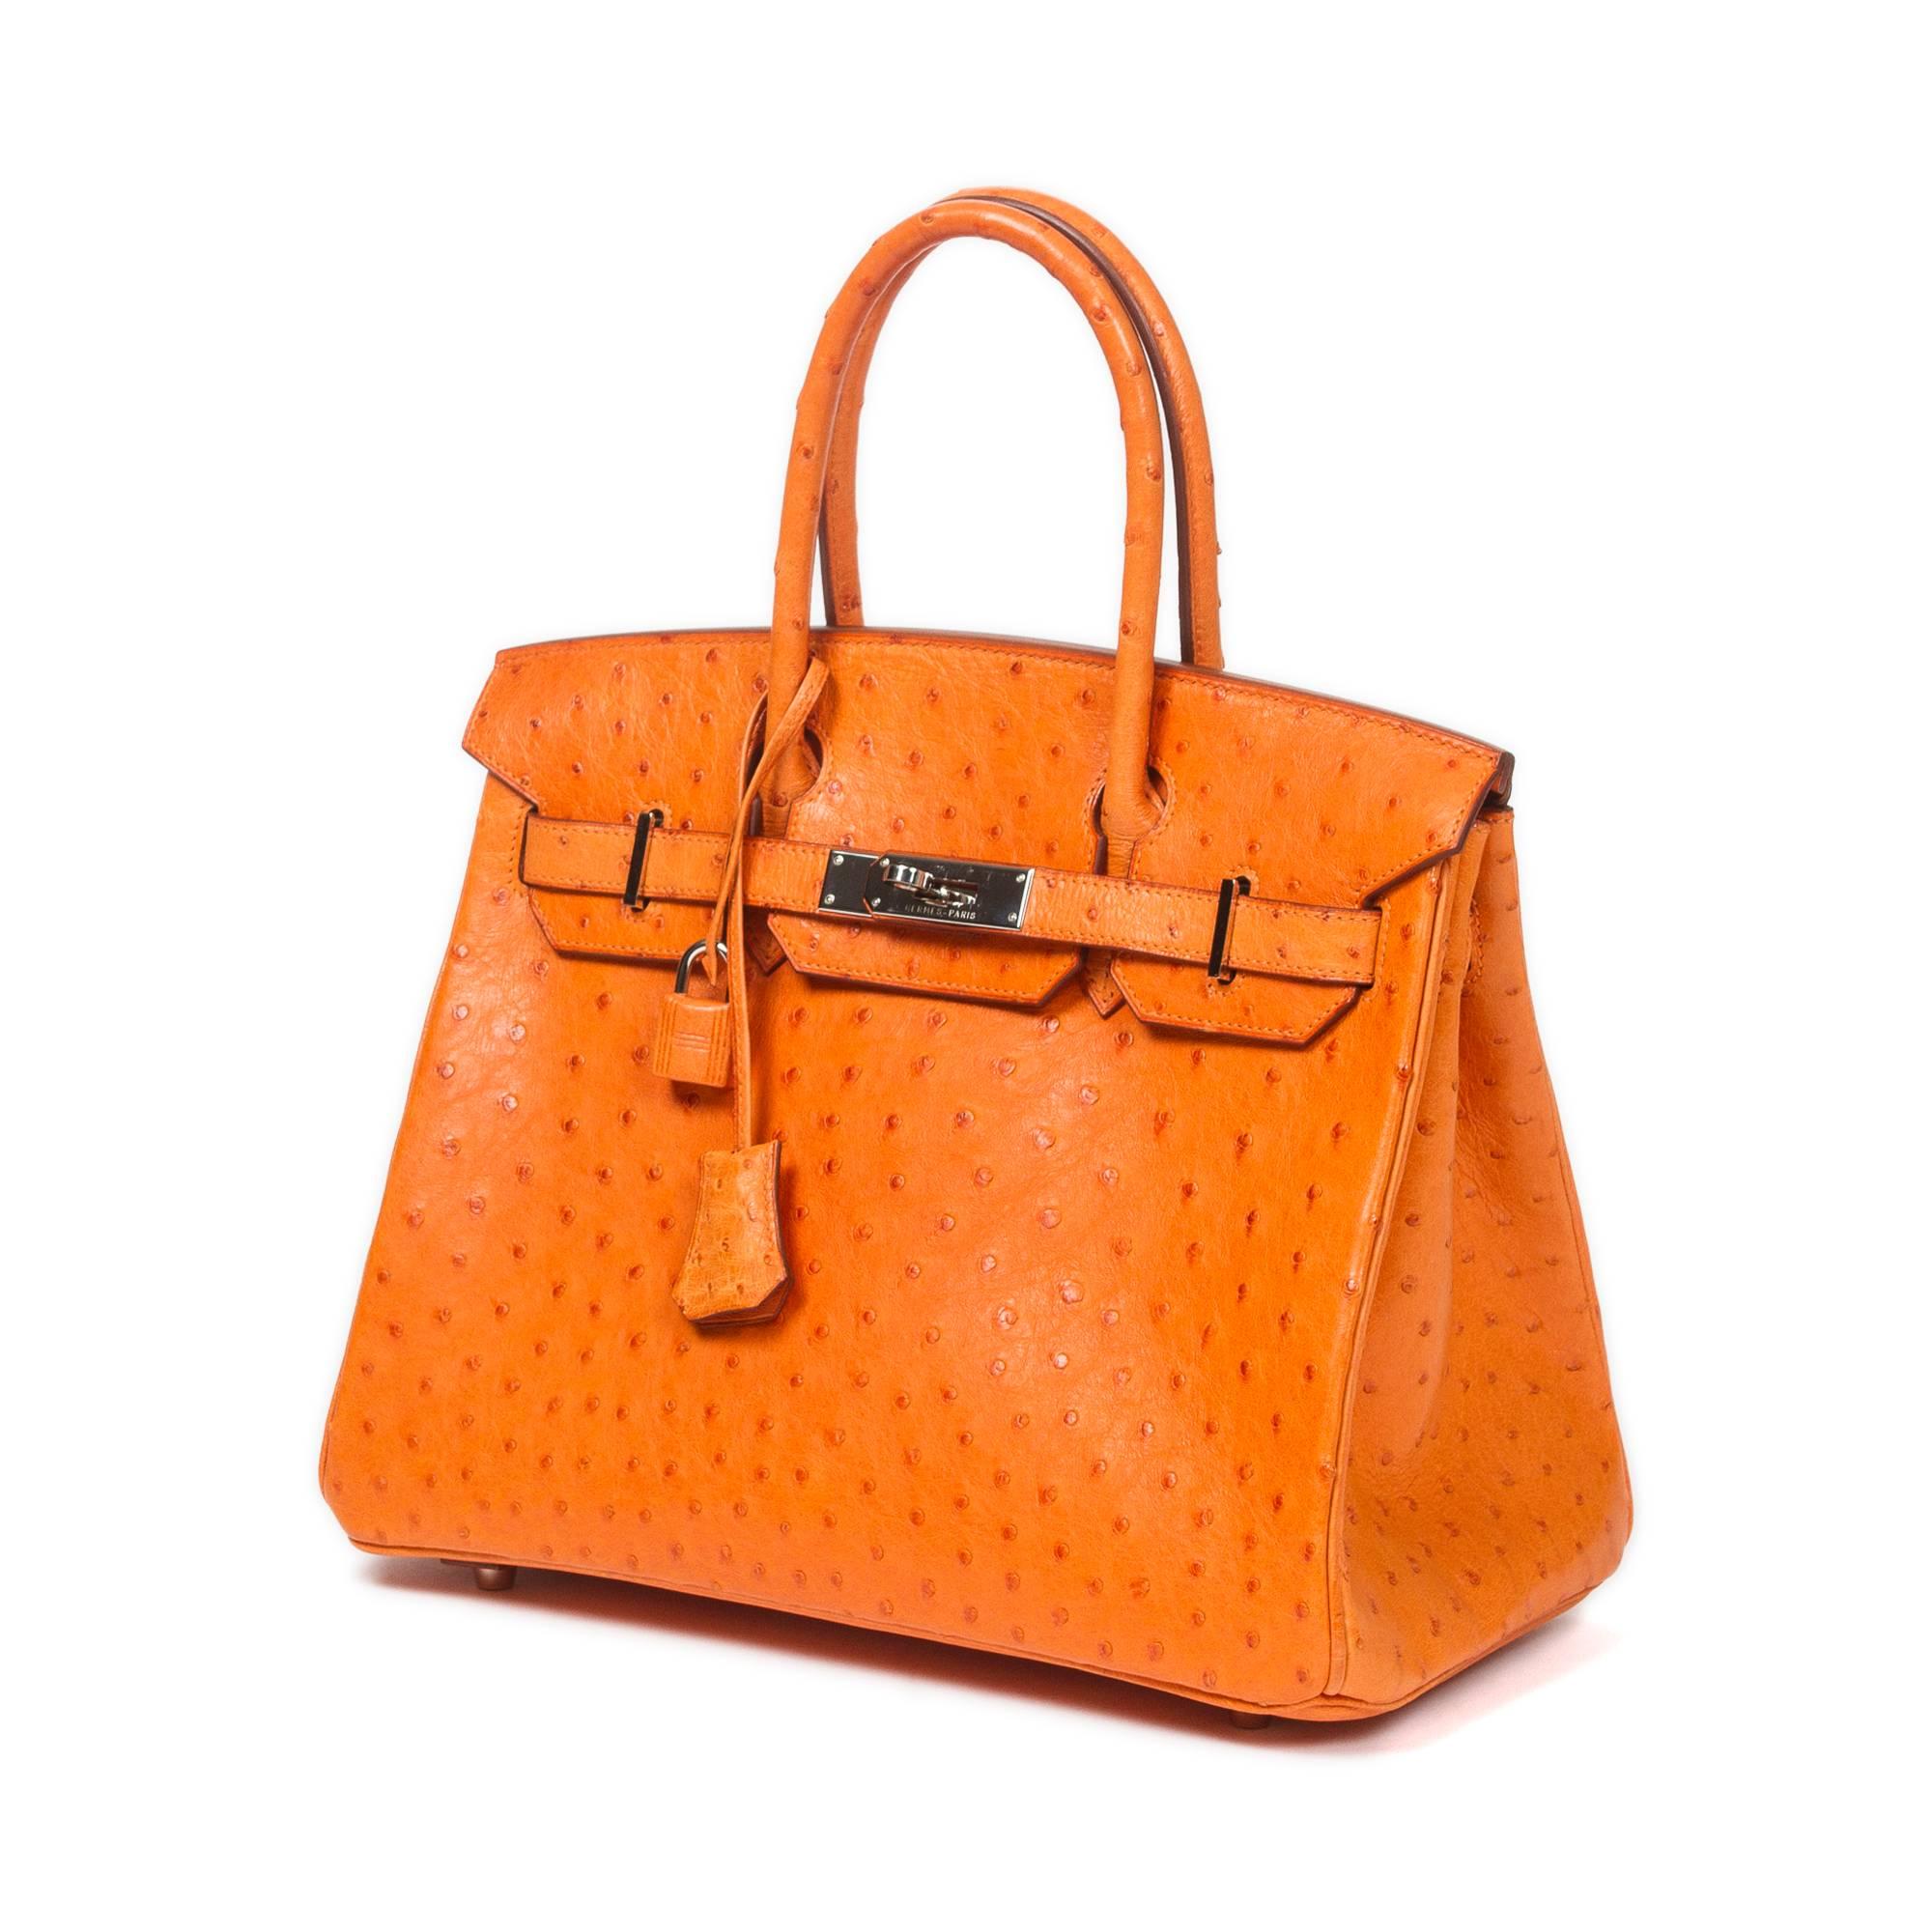 Beautiful Birkin 30 in Tangerine ostrich skin with cadenas and keys in clochette, silver tone hardware. Orange chèvre leather lined interior with one slip pocket and one zip pocket. Stamp F in square. Model from 2002. Dustbag included. There are